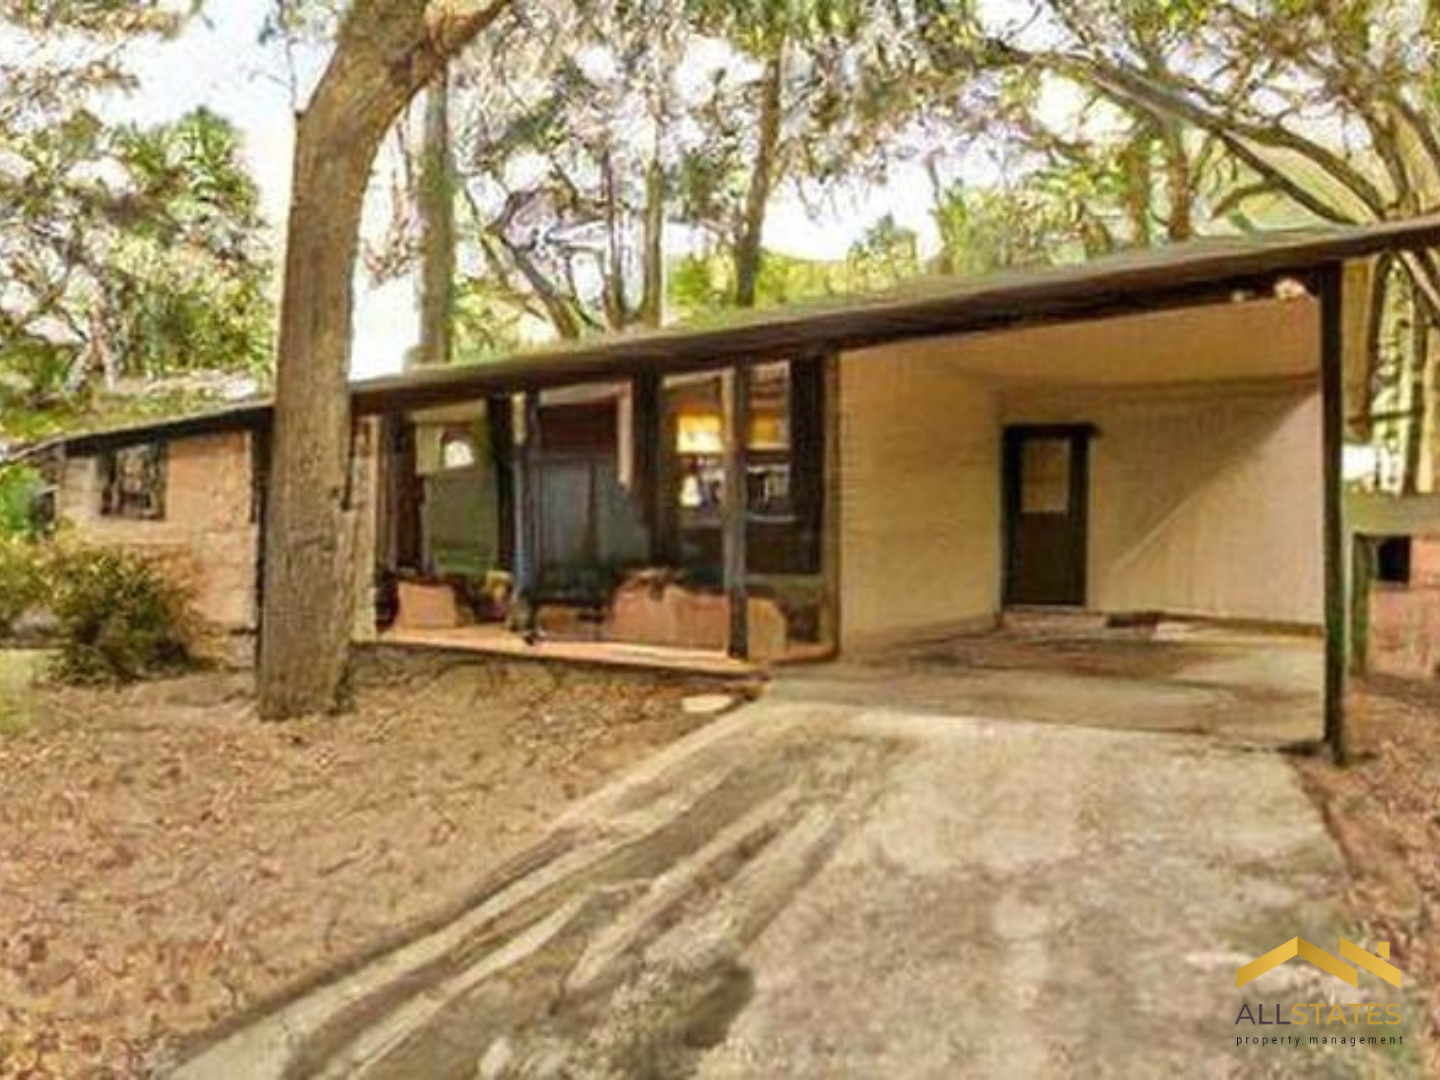 Photo of property: 2409 Almond Dr, Tallahassee, FL 32303